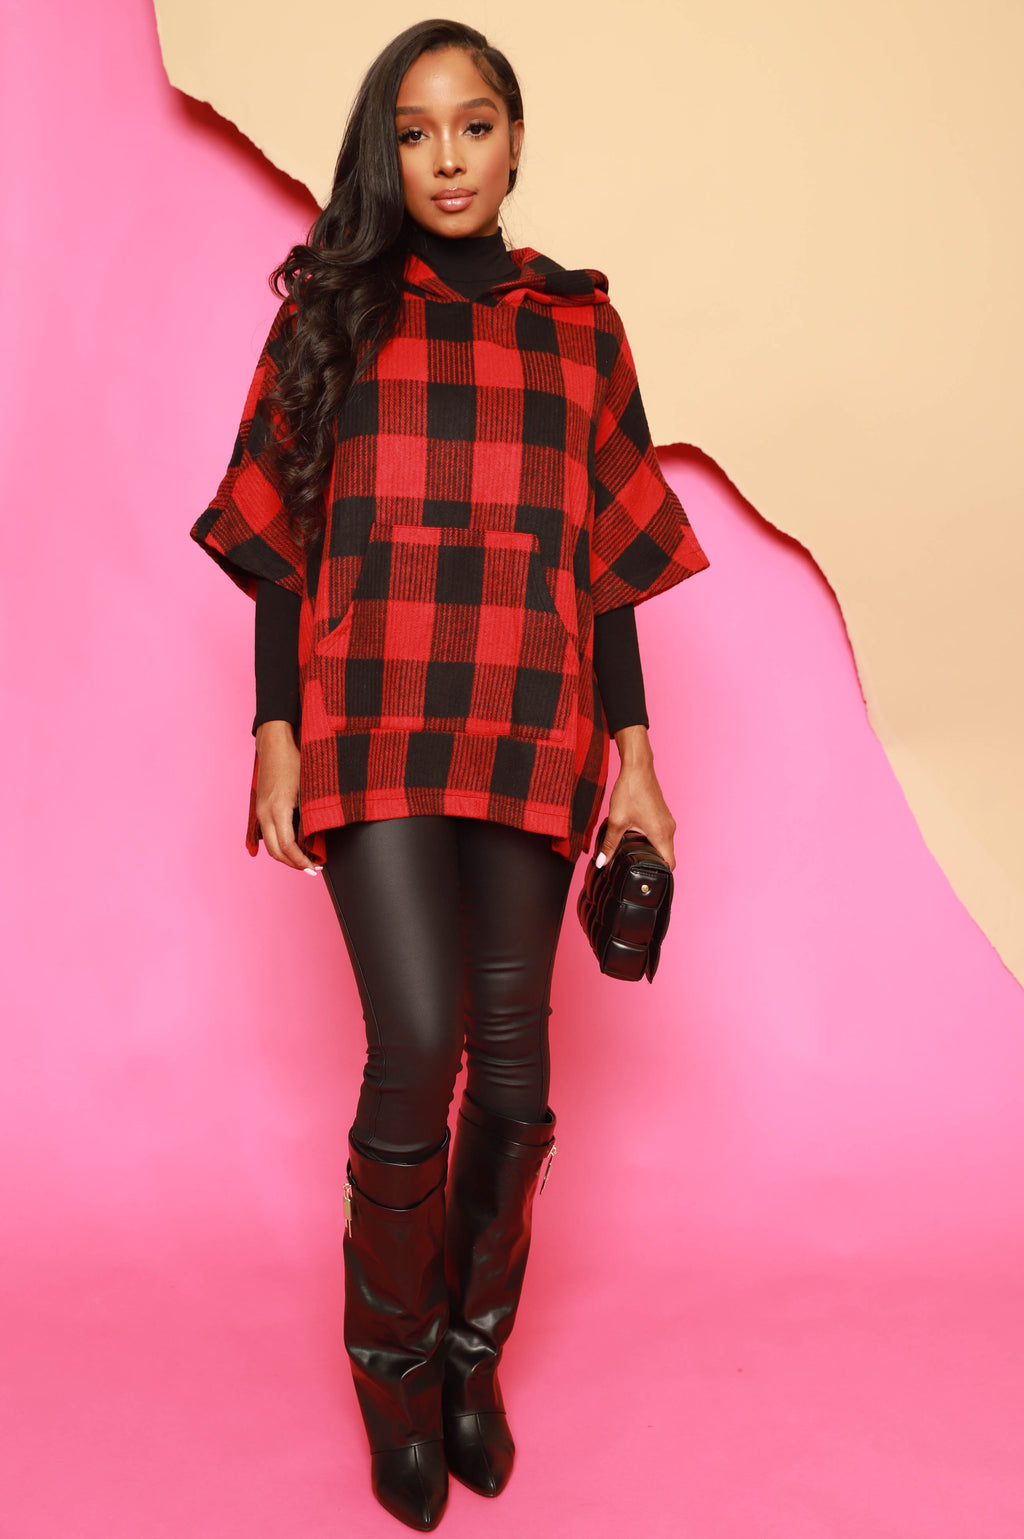 Campgrounds Flannel Hooded Poncho - Red/Black - grundigemergencyradio